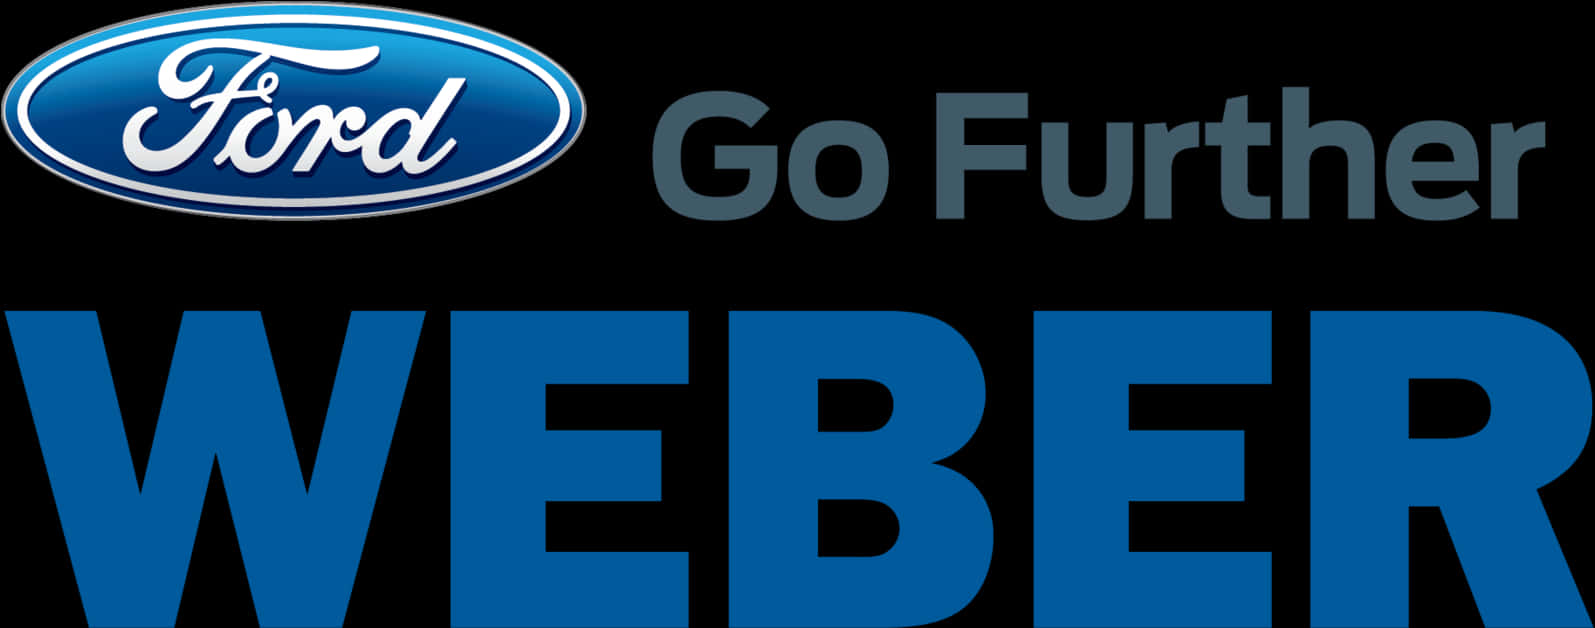 Ford Go Further Weber Branding PNG